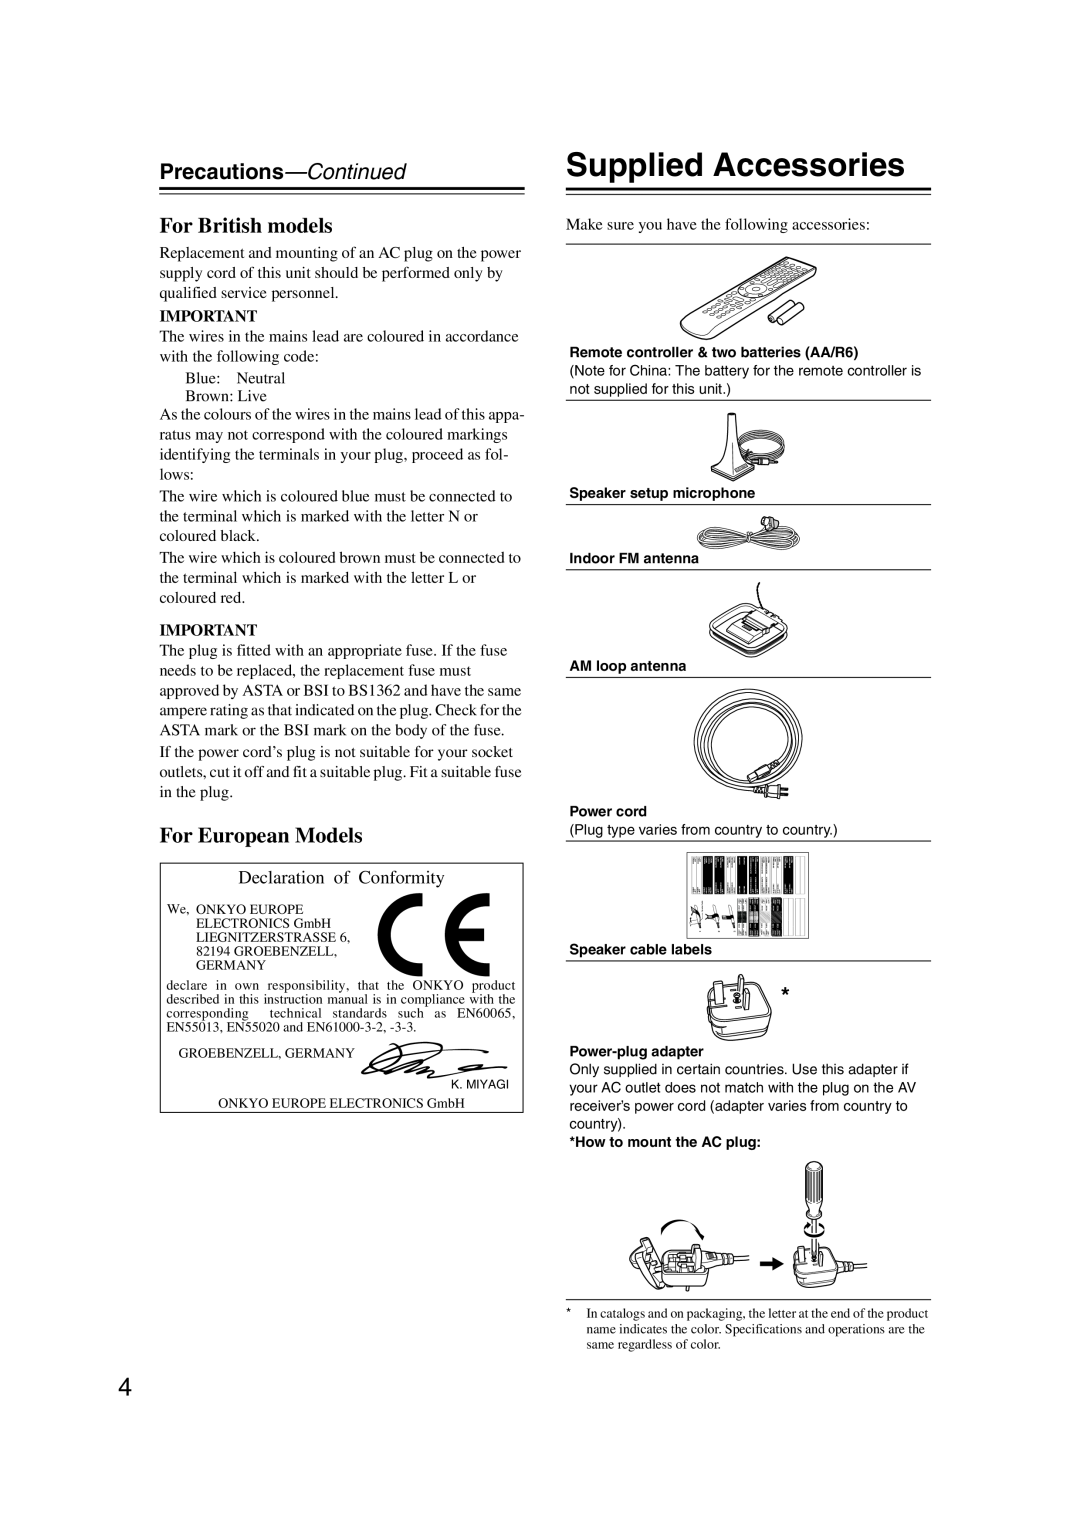 Onkyo TX-NR1007 instruction manual Supplied Accessories, Precautions-Continued, For British models, For European Models 